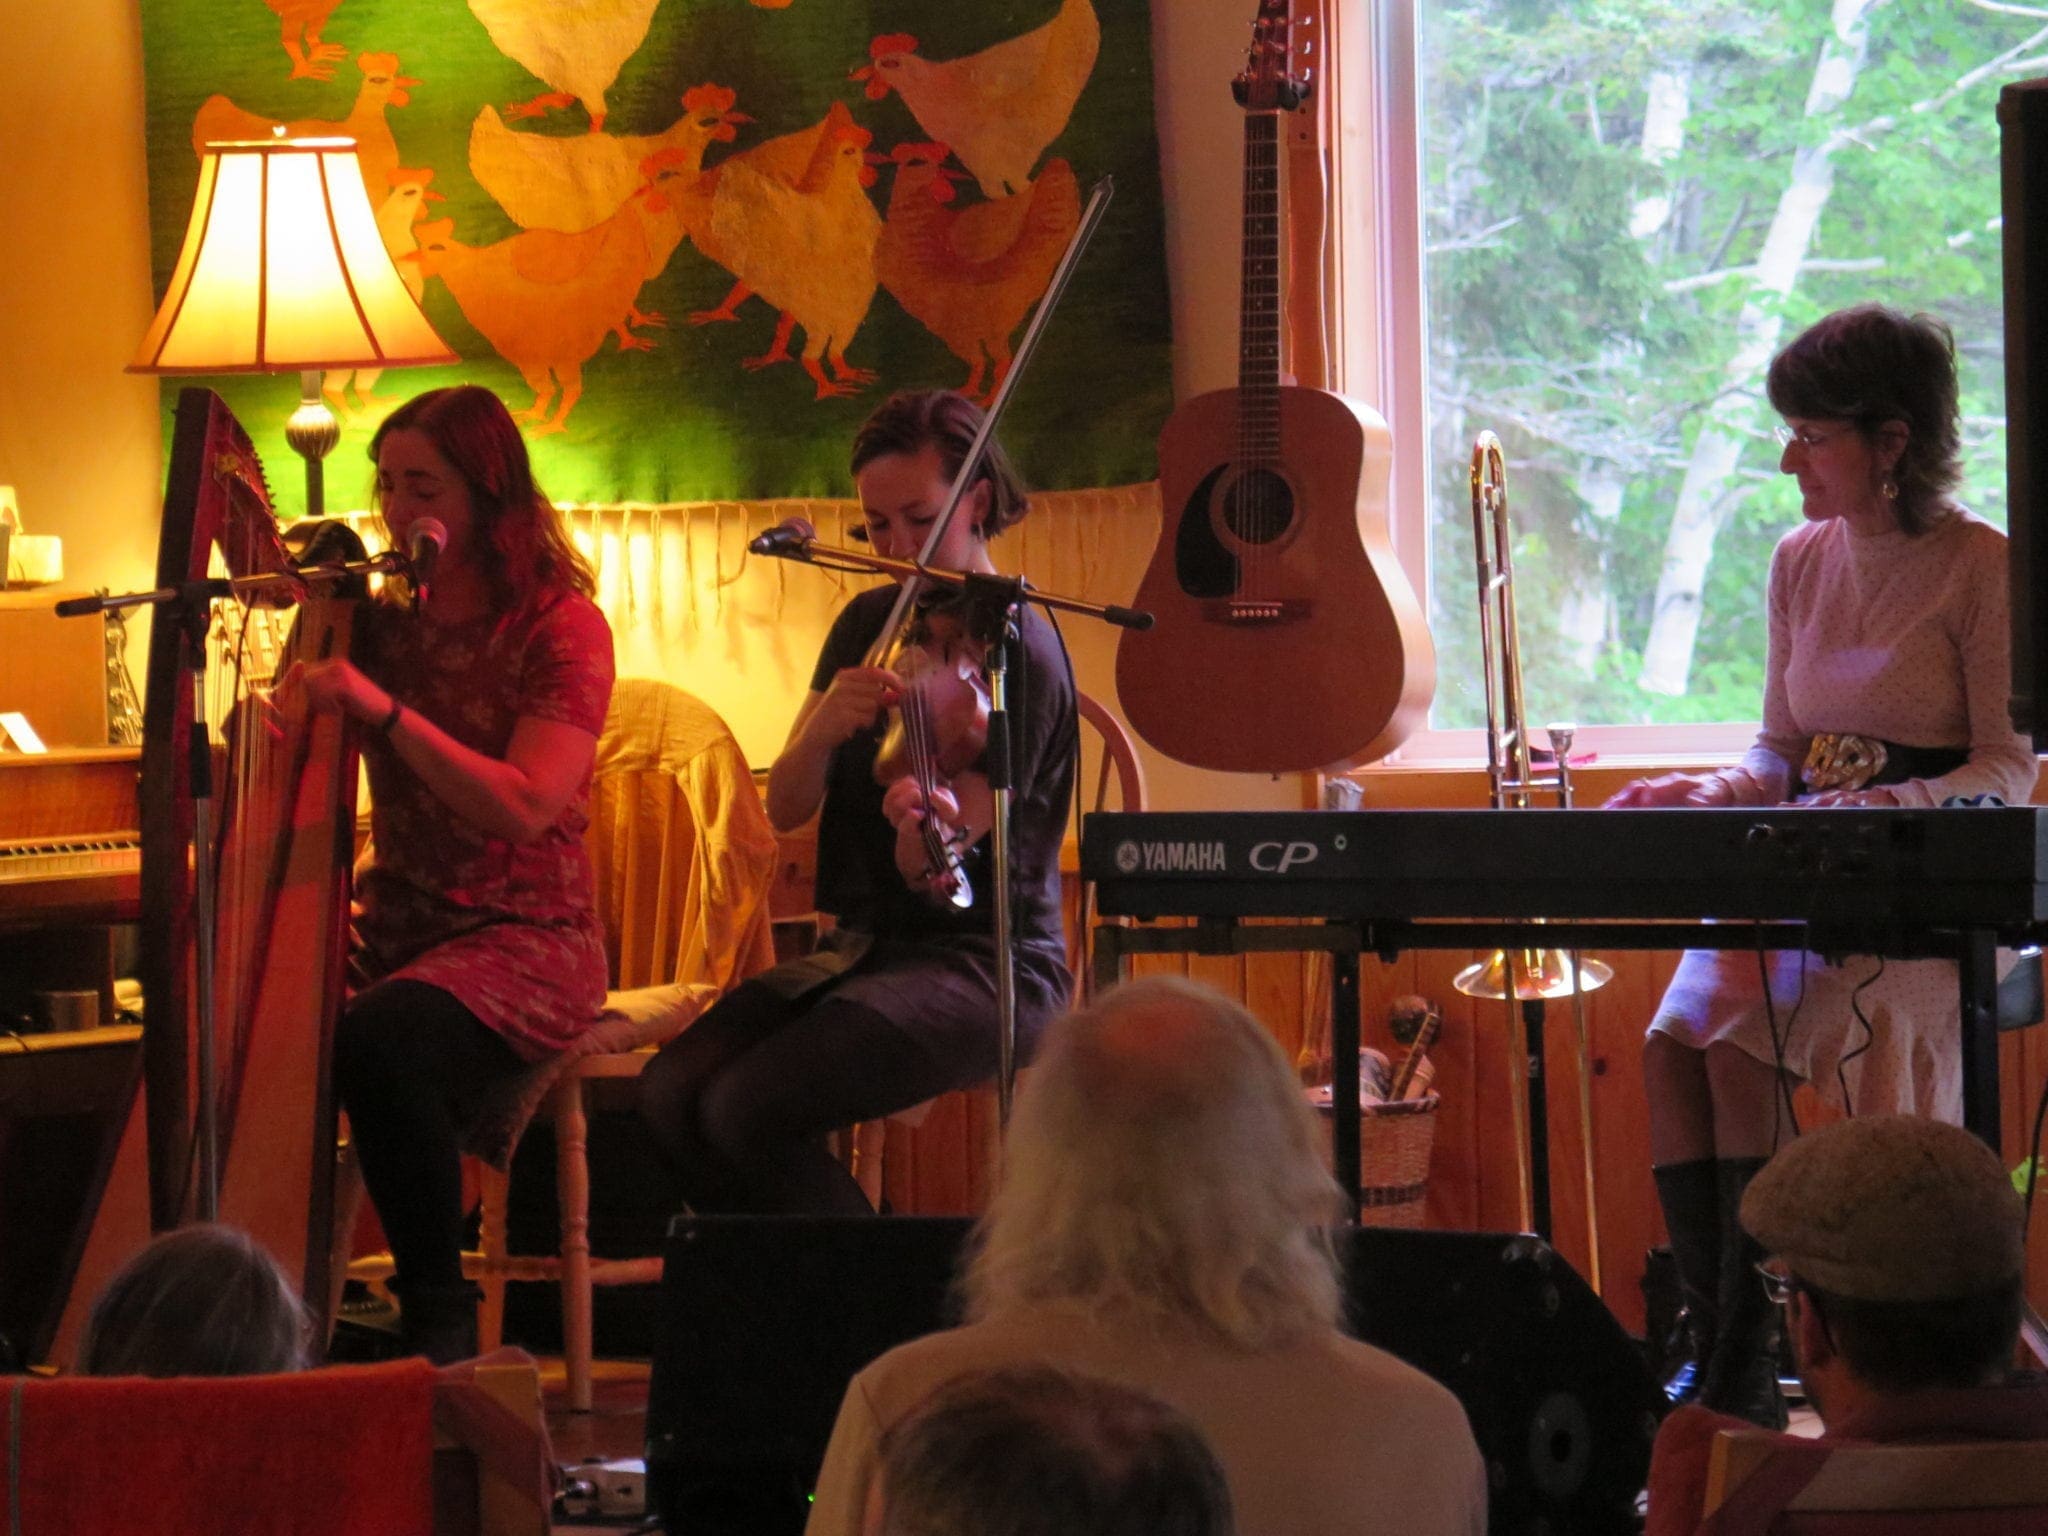 group of musicians performing indoors.